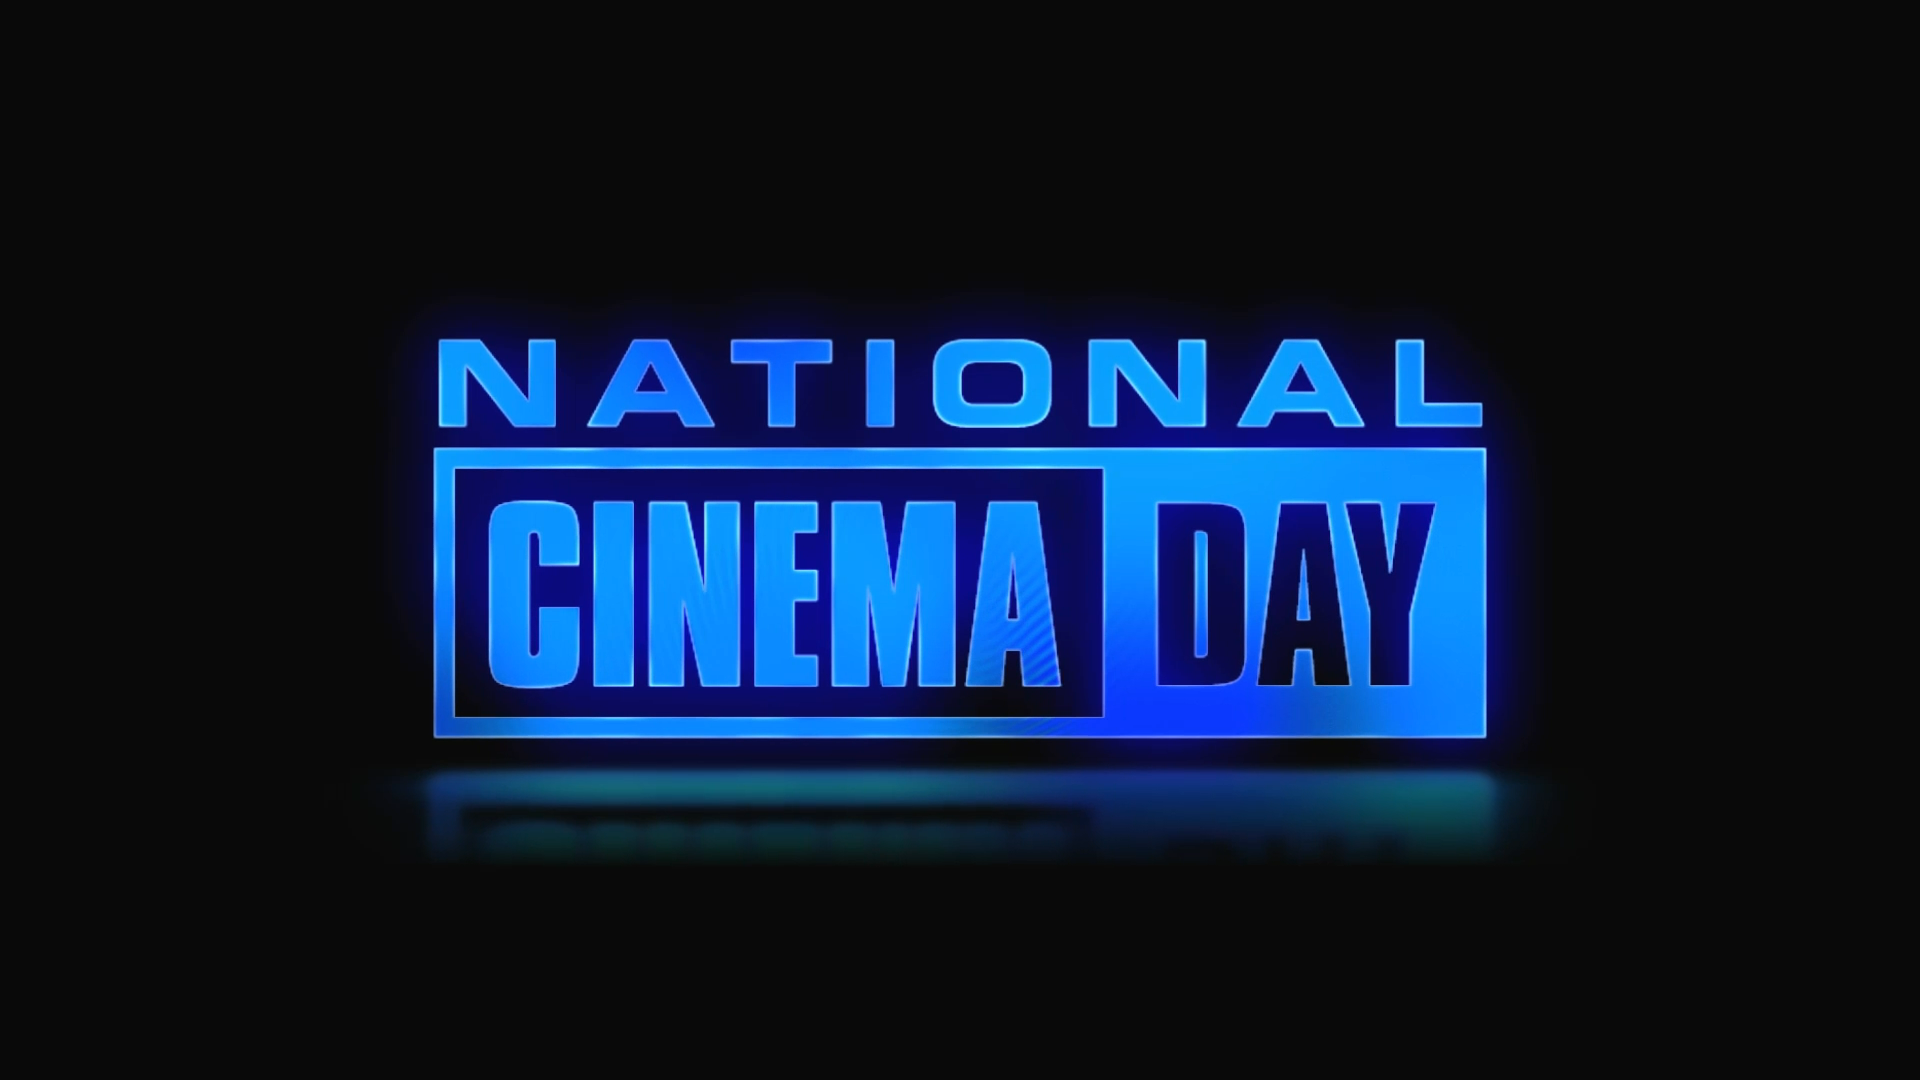 September 3rd Is National Cinema Day In The US; $3 Tickets For The Day.